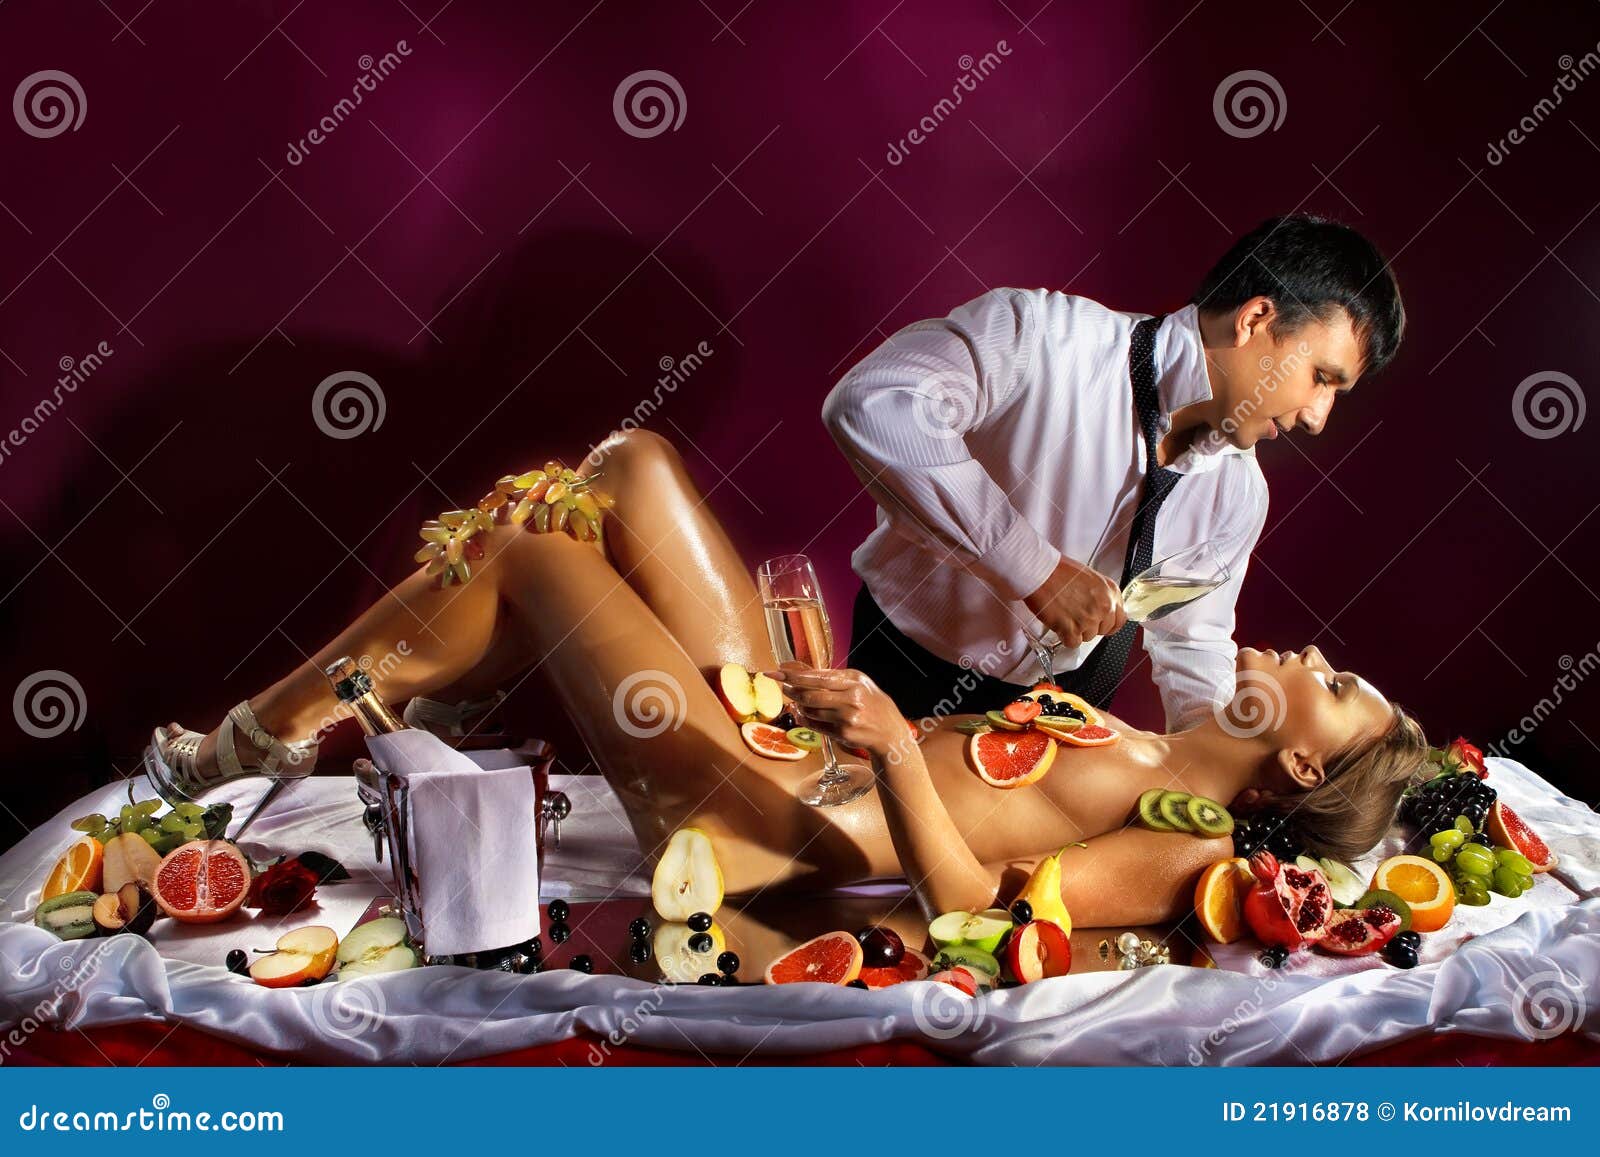 naked women with food